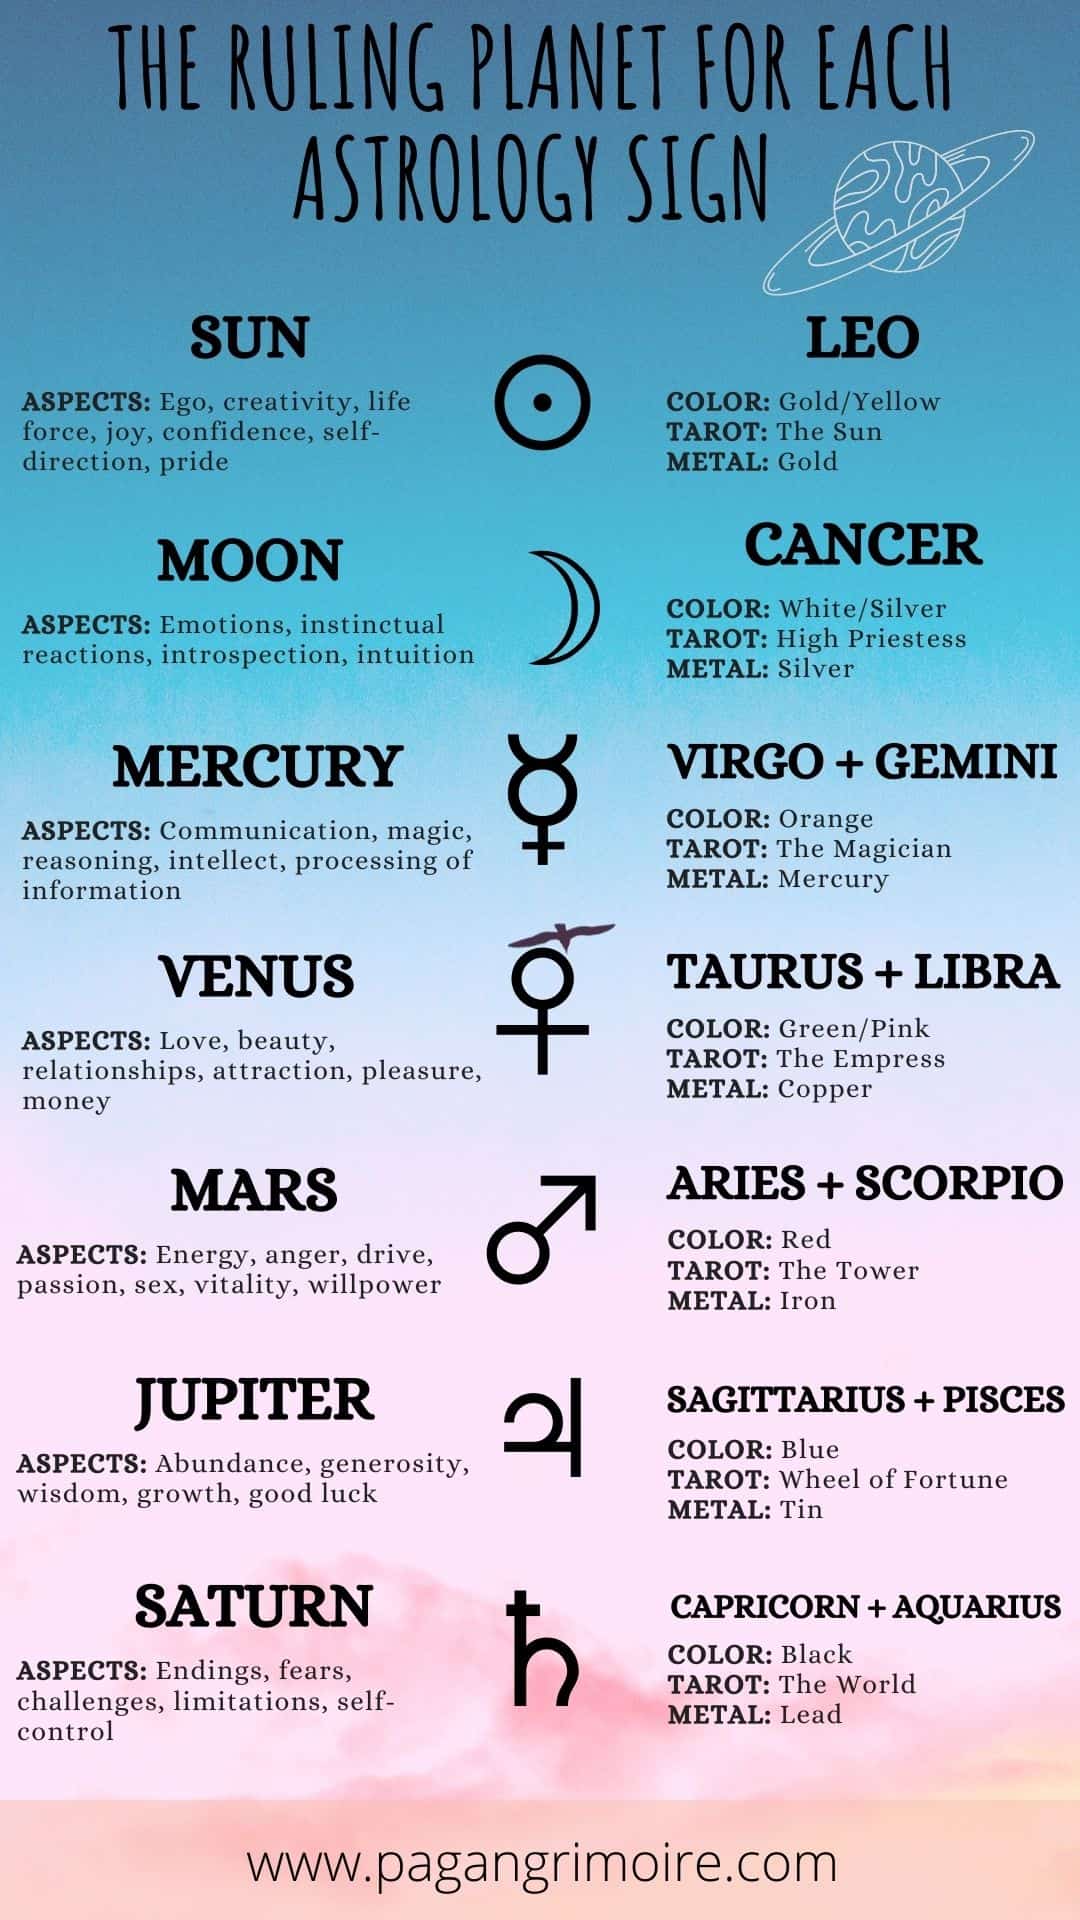 Zodiac signs ruling planets